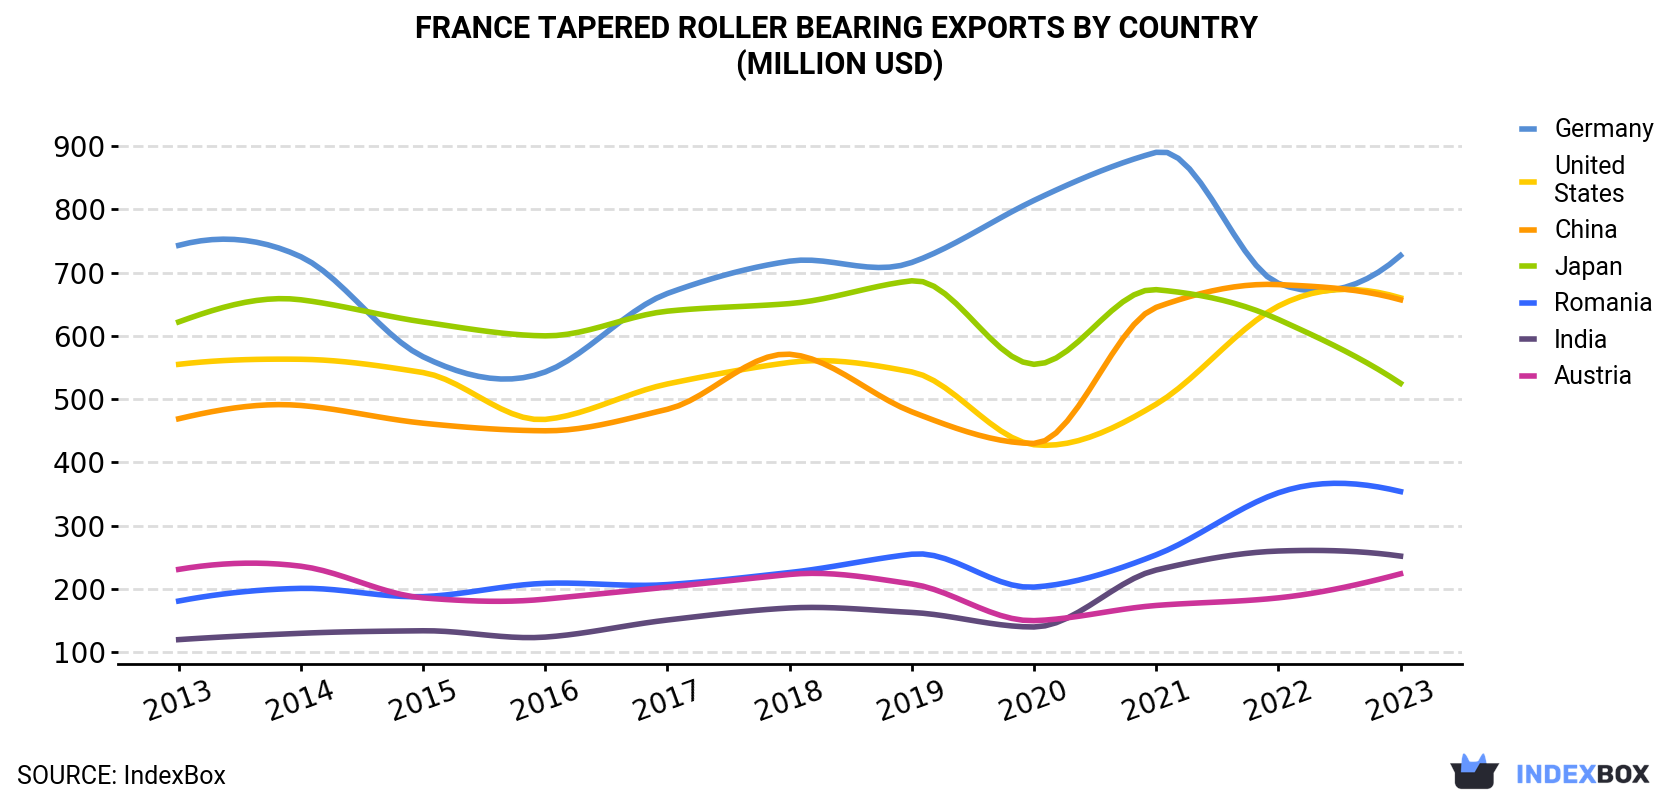 France Tapered Roller Bearing Exports By Country (Million USD)